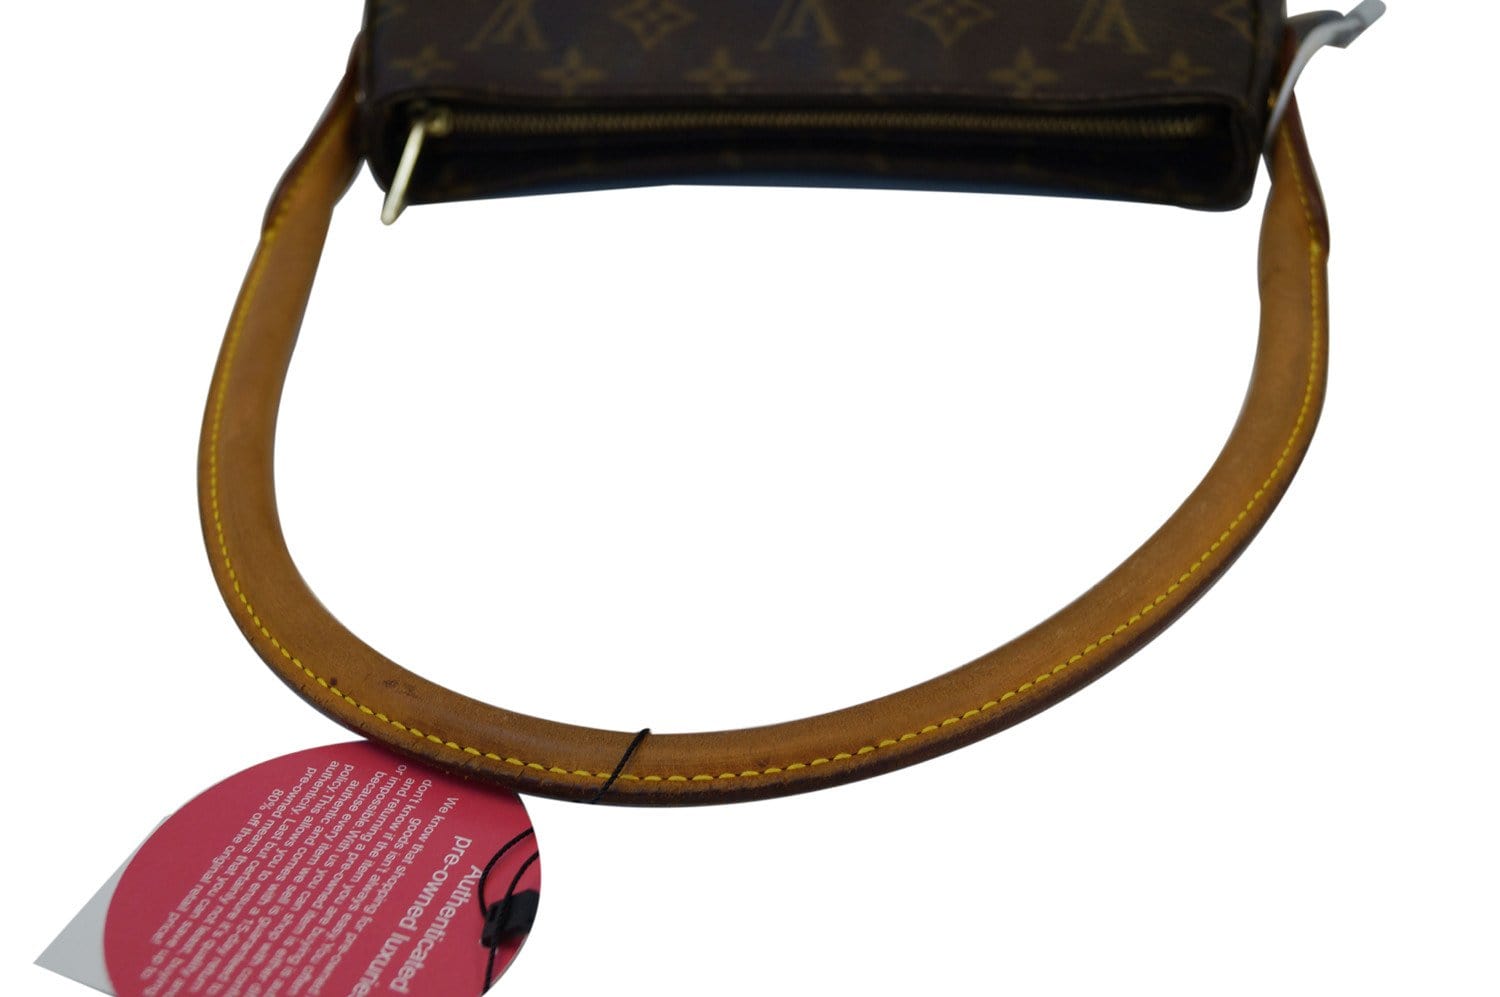 Authenticated Used Louis Vuitton Shoulder Bag Looping Brown